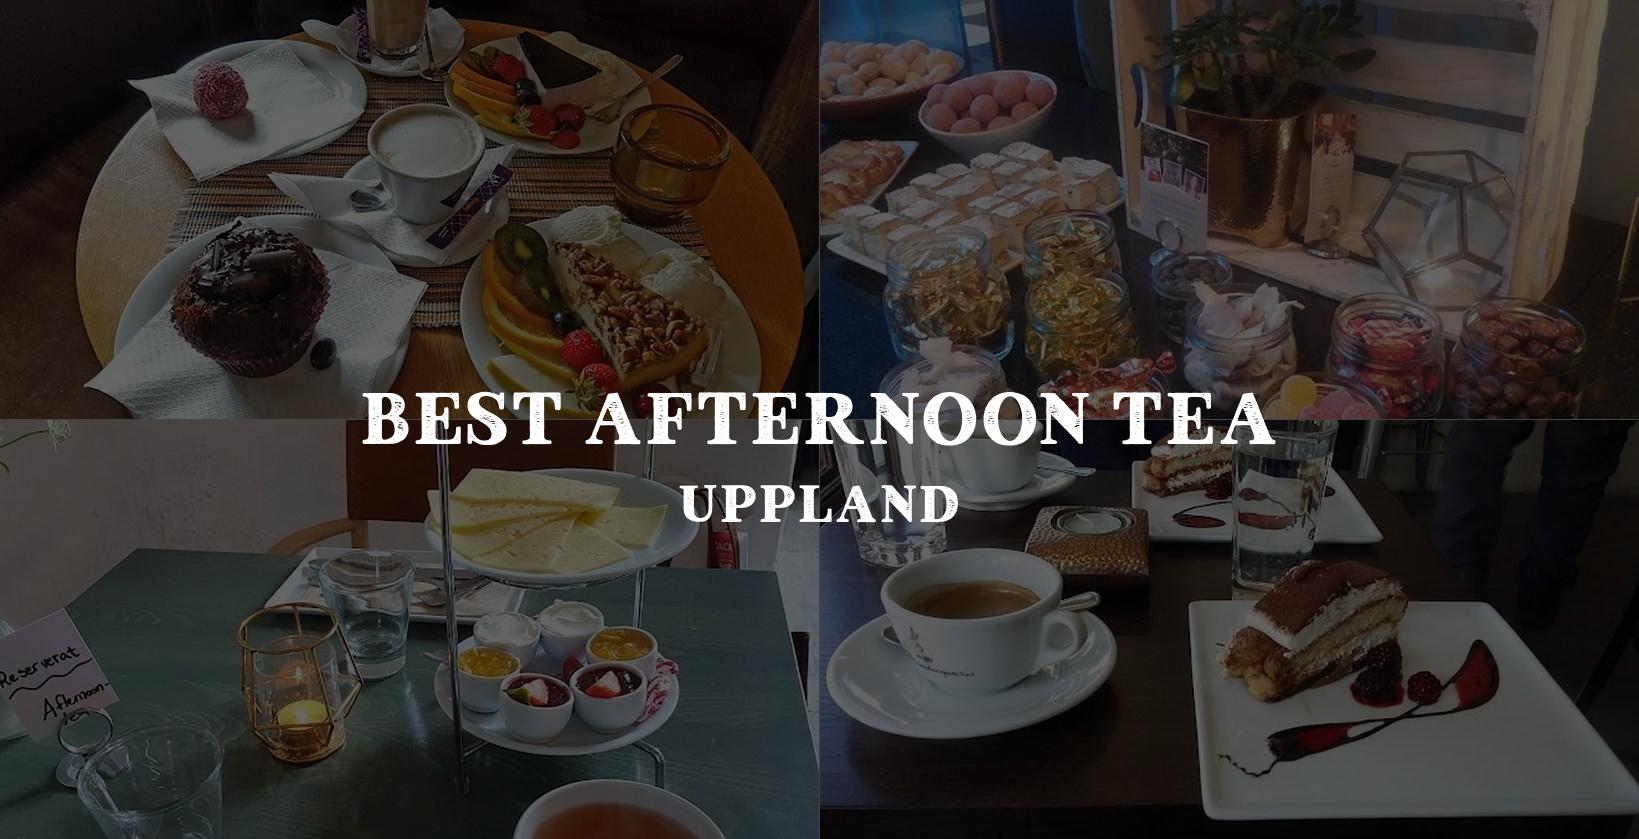 Choosing the perfect spot for afternoon tea in Uppland